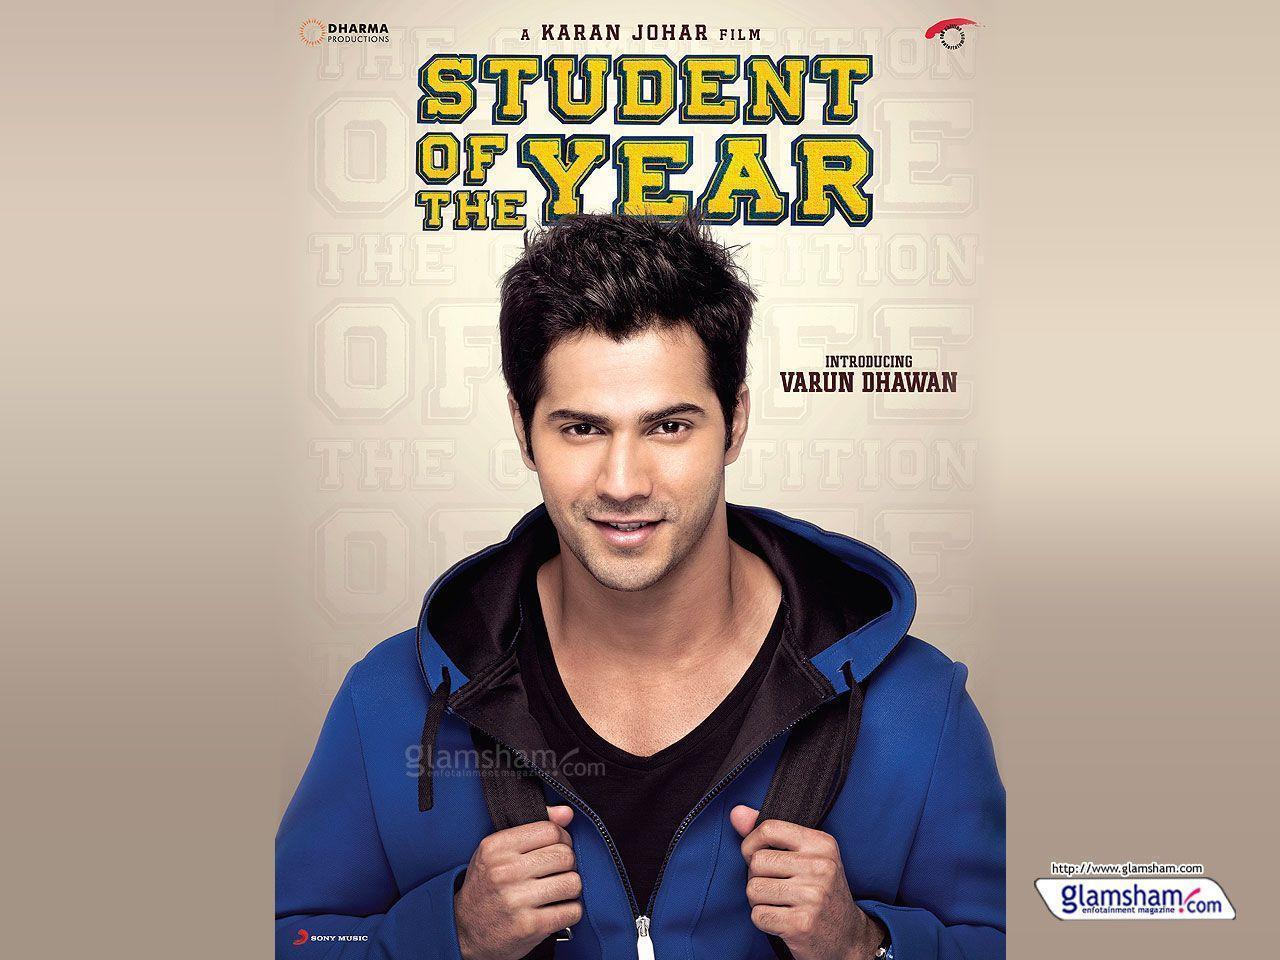 Student of the year movie wallpaper 42535